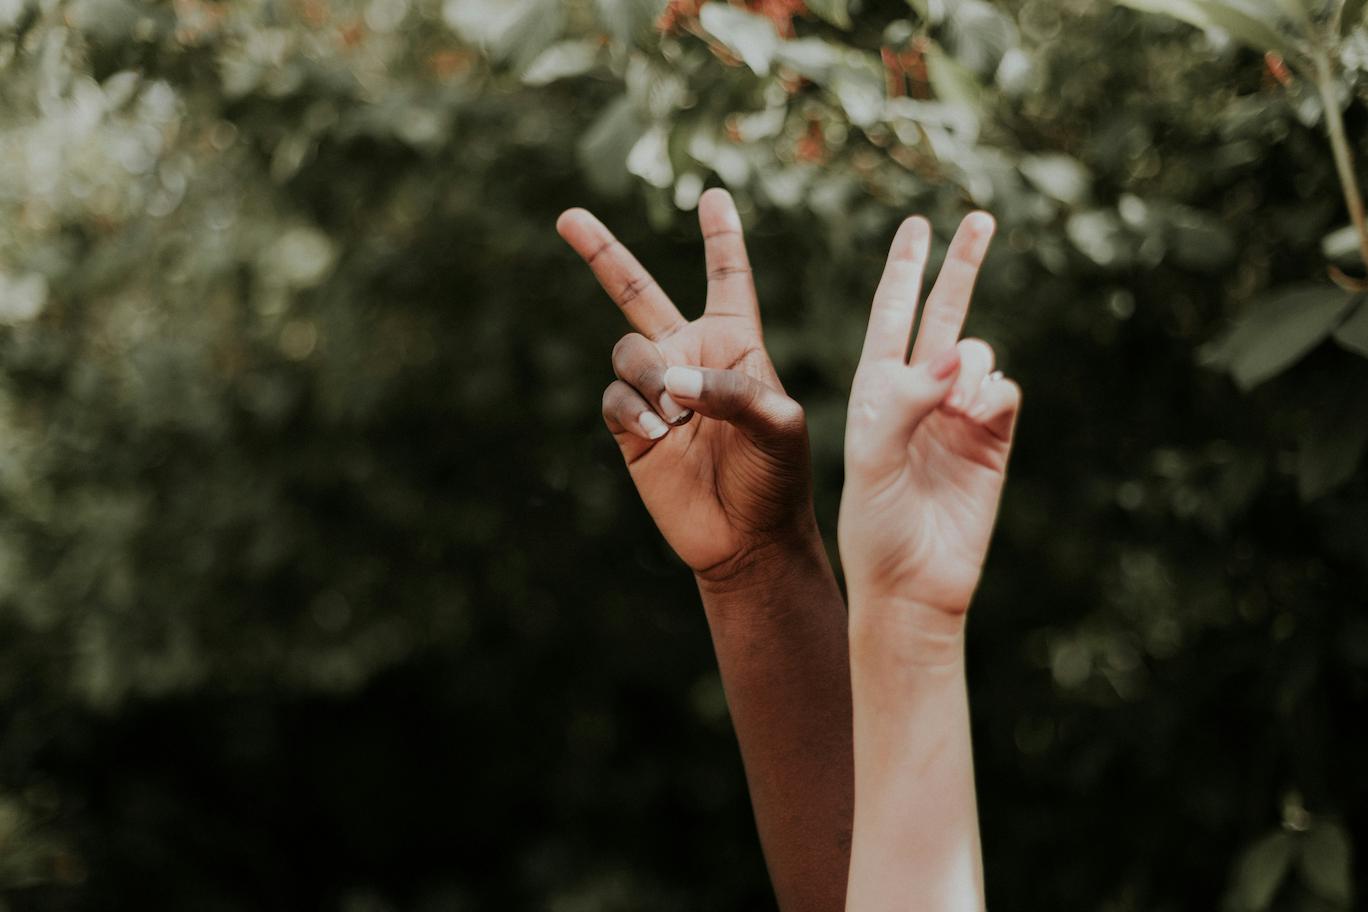 Two hands -- one from a black and another looking fair -- both up in the air showing a peace sign, symbolizing equality among races -- a core theme of famous black speakers' message.